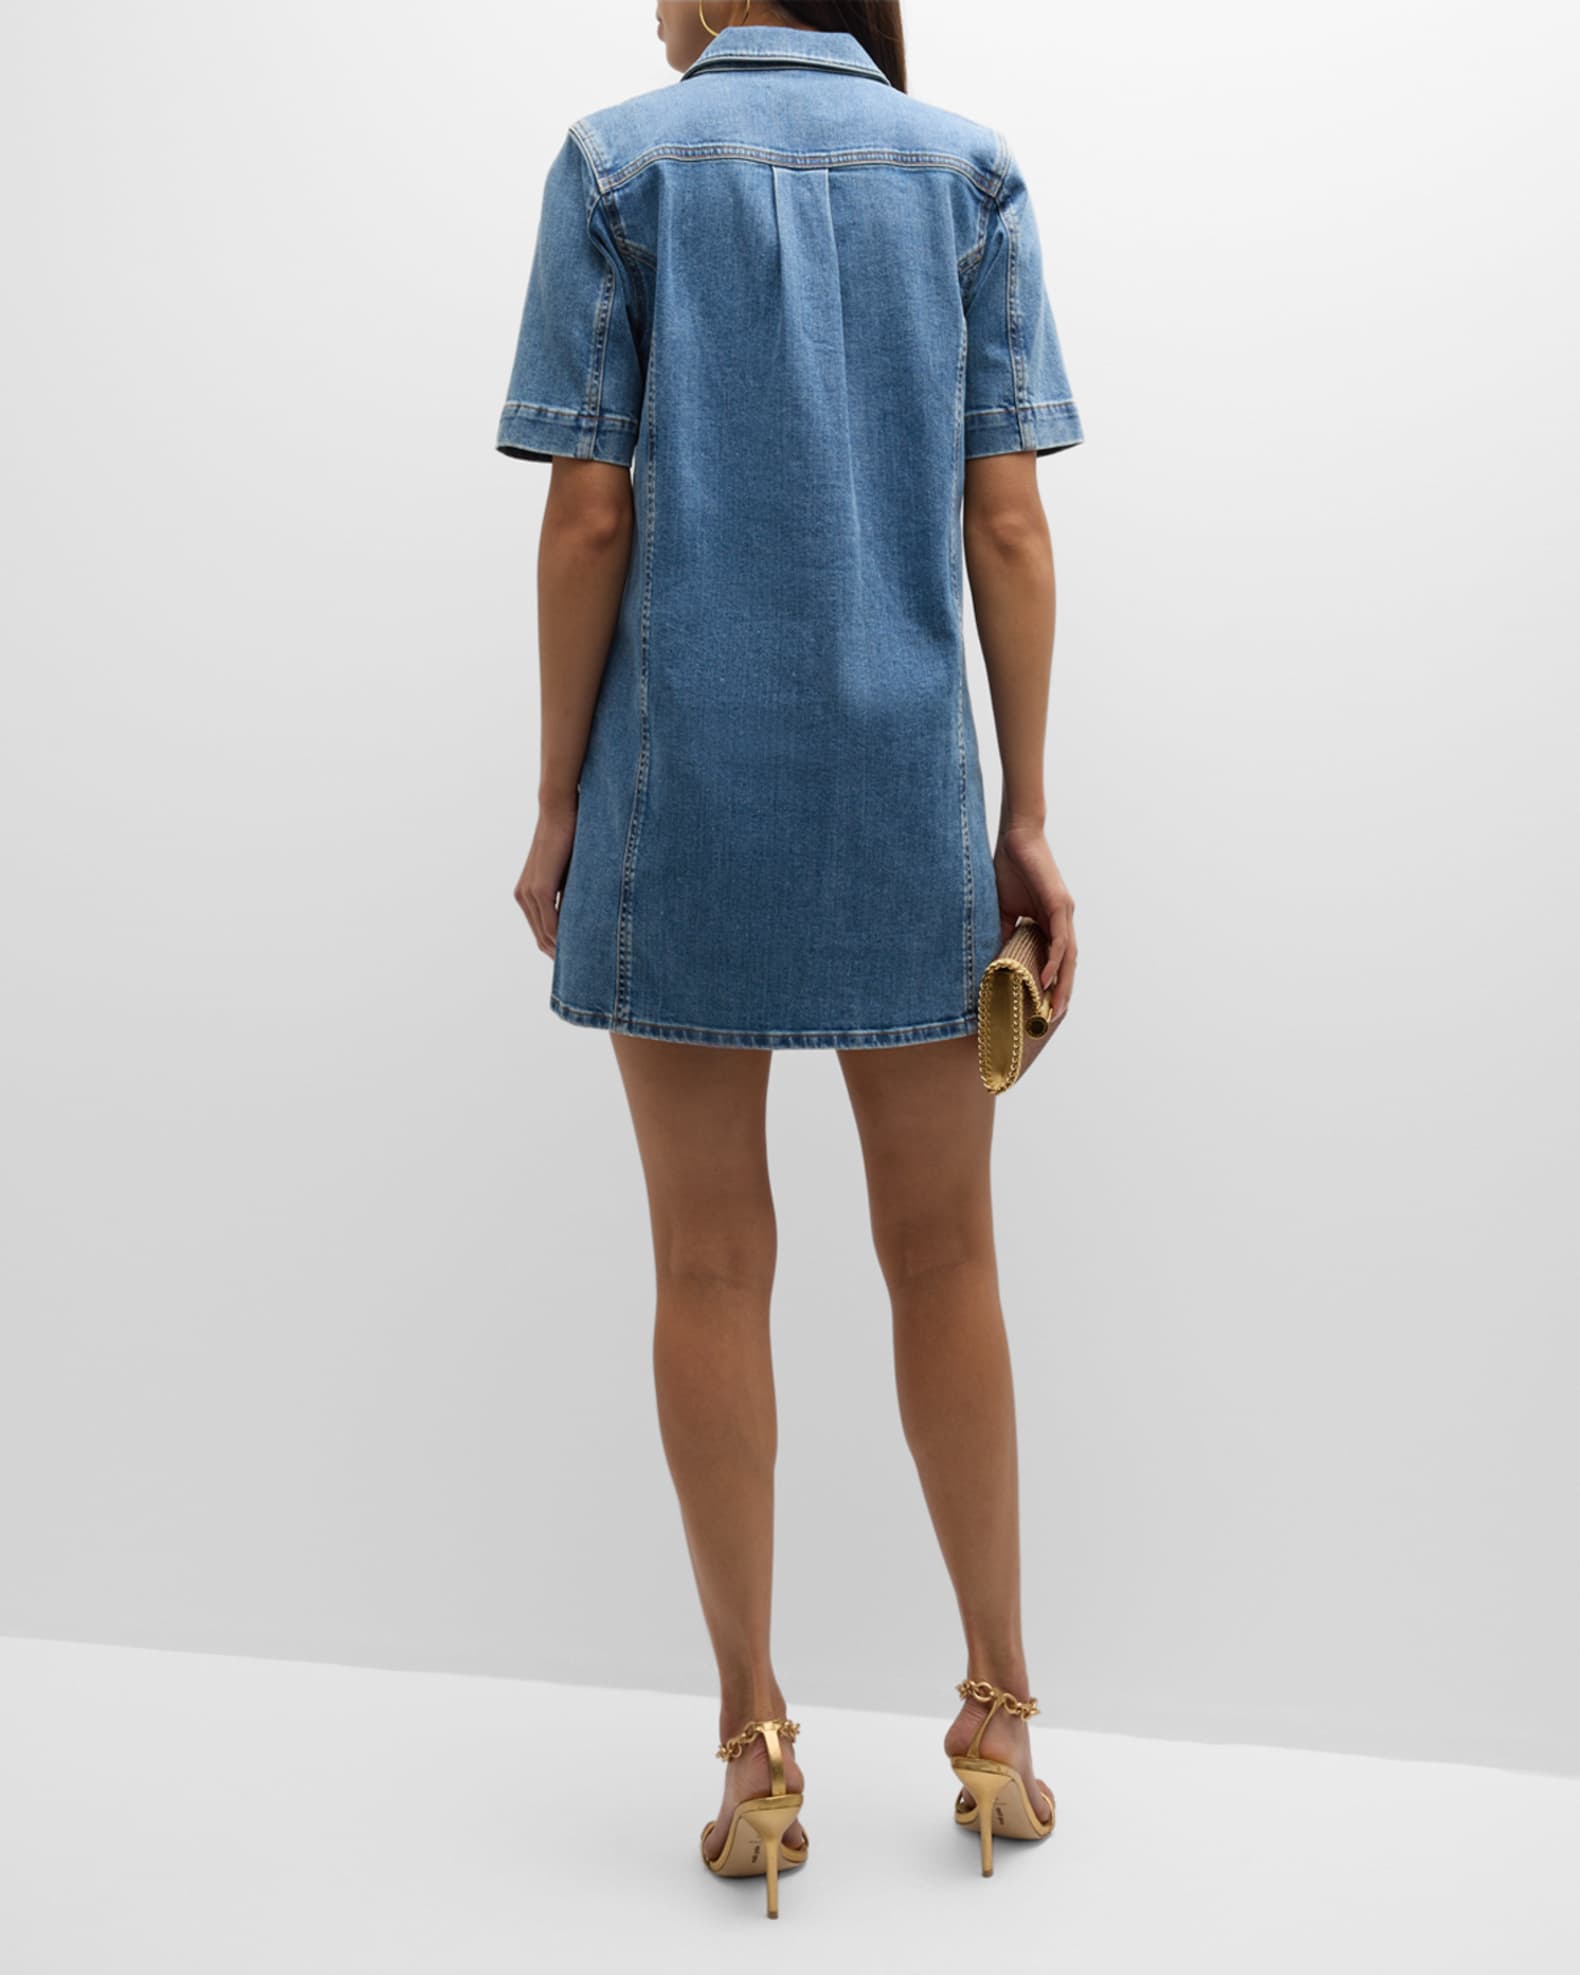 Denim Shirtdress by See by Chloé for $50